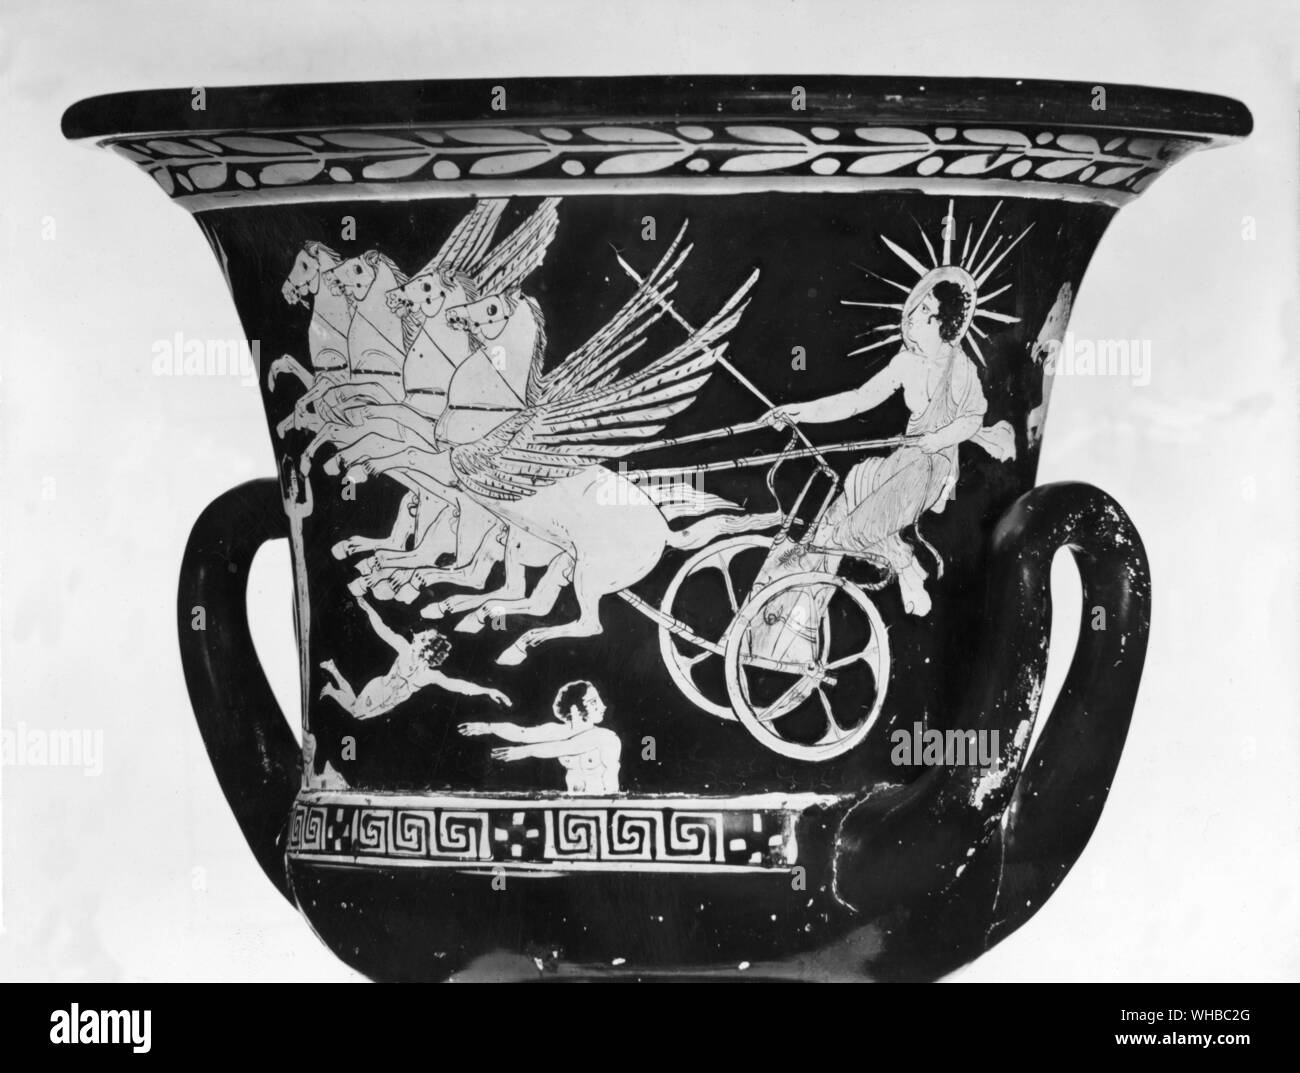 Vase - Helios - Phaeton - in Greek mythology the sun was personified as Helios (Helius). Helios was imagined as a handsome god crowned with the shining aureole of the sun, who drove a chariot across the sky eah day to eath-circling Oceanus and throught he world-ocean returned to the East at night. Homer descirbed it as drawn by solar bulls and Pindar saw it as drawn by fire-darting steeds. Still later, the horses were given fiery names, Pyrios, Aeos, Aethon and Phlegon.. Stock Photo